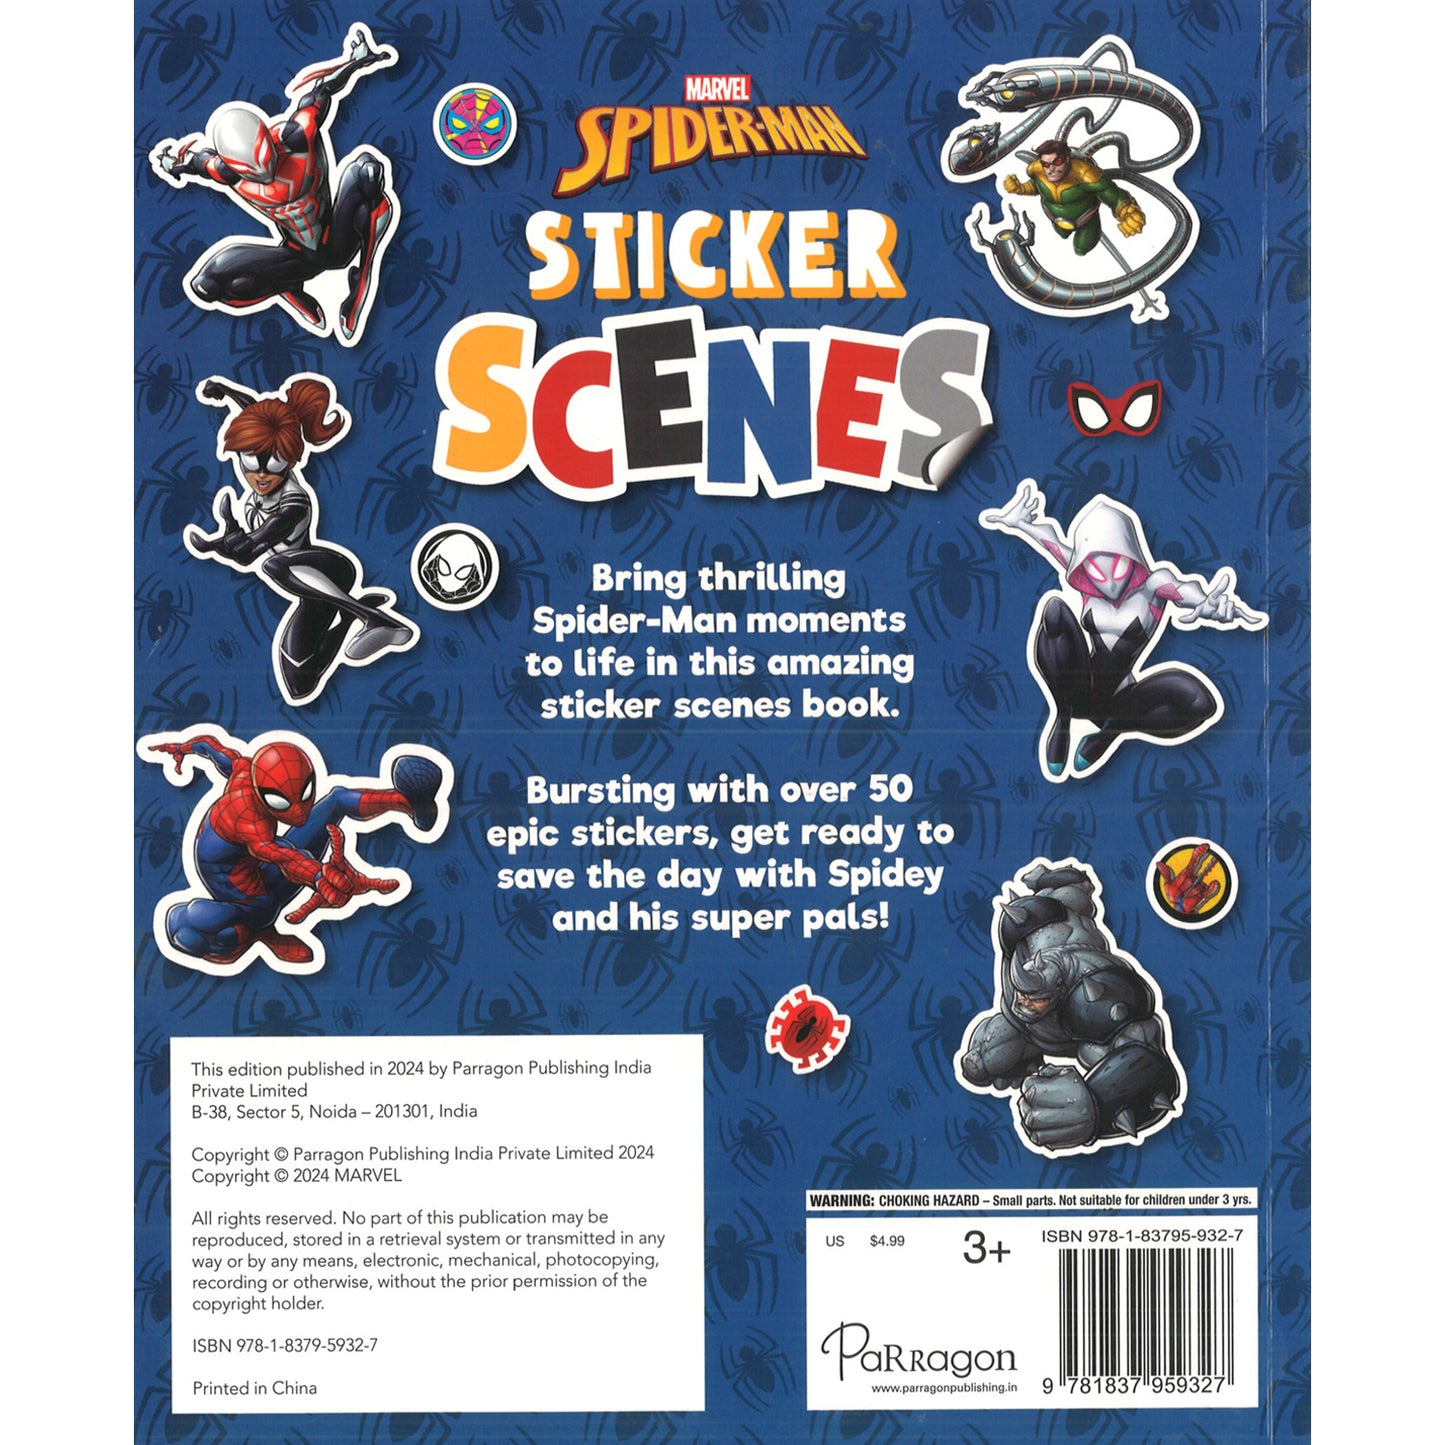 Marvel Spider-Man: Sticker Scenes | Stickers & Activities Book for 6 to 8 Year's Old